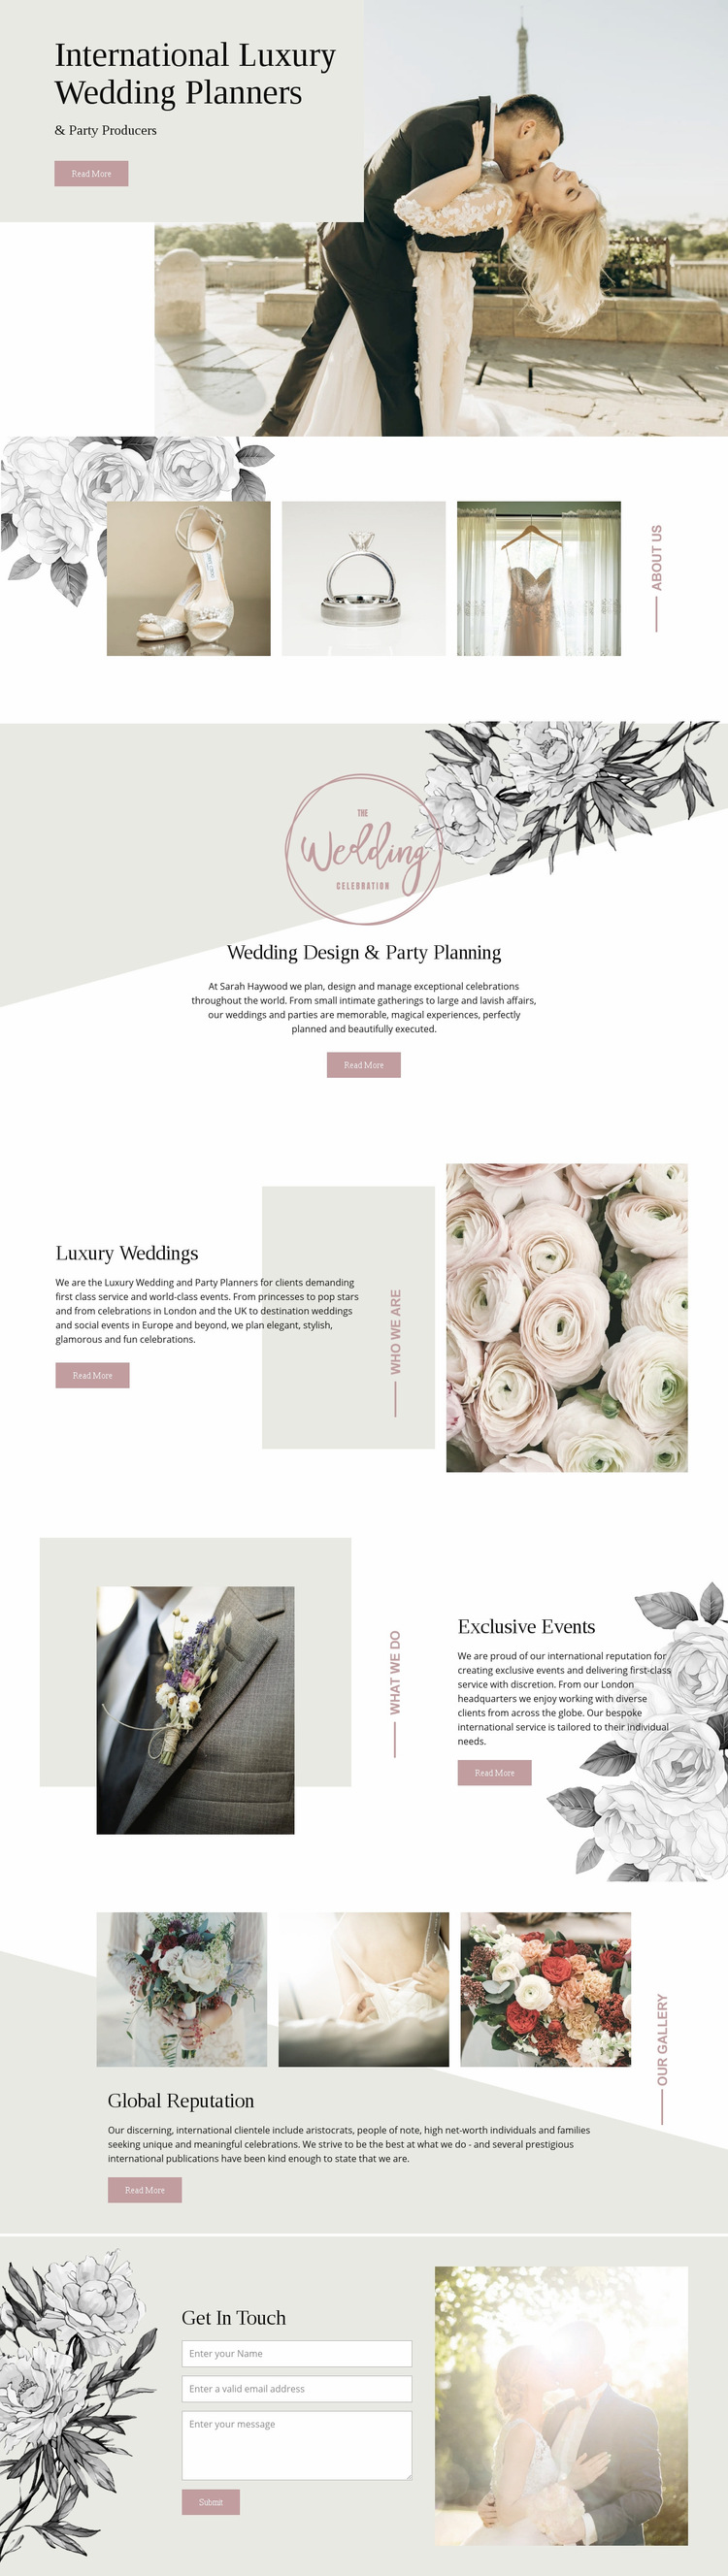 Planners of luxury wedding Web Page Design